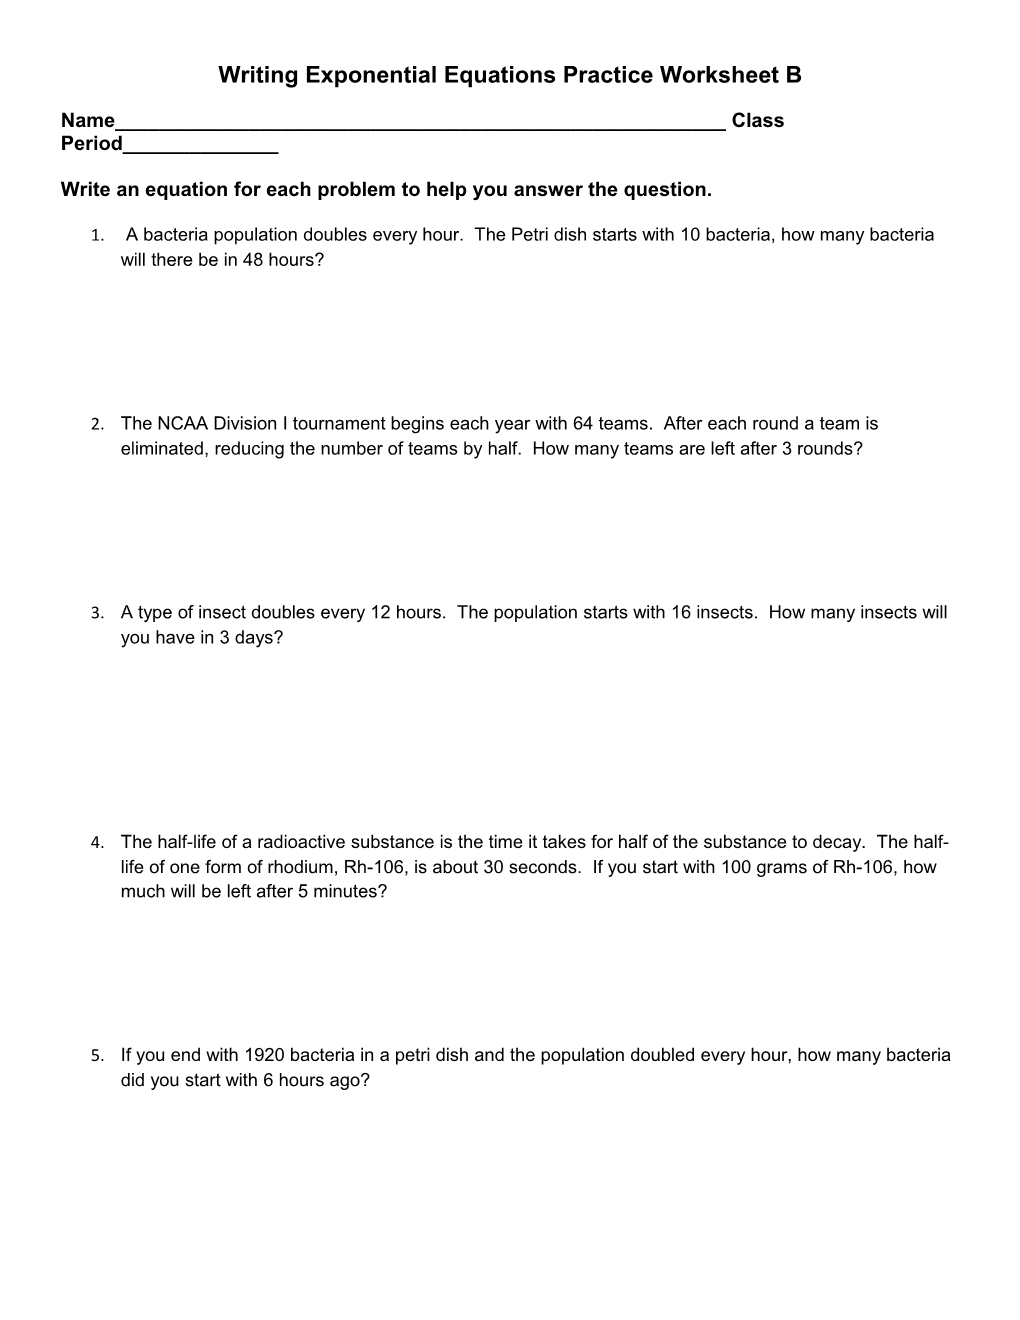 Writing Exponential Equations Practice Worksheet B